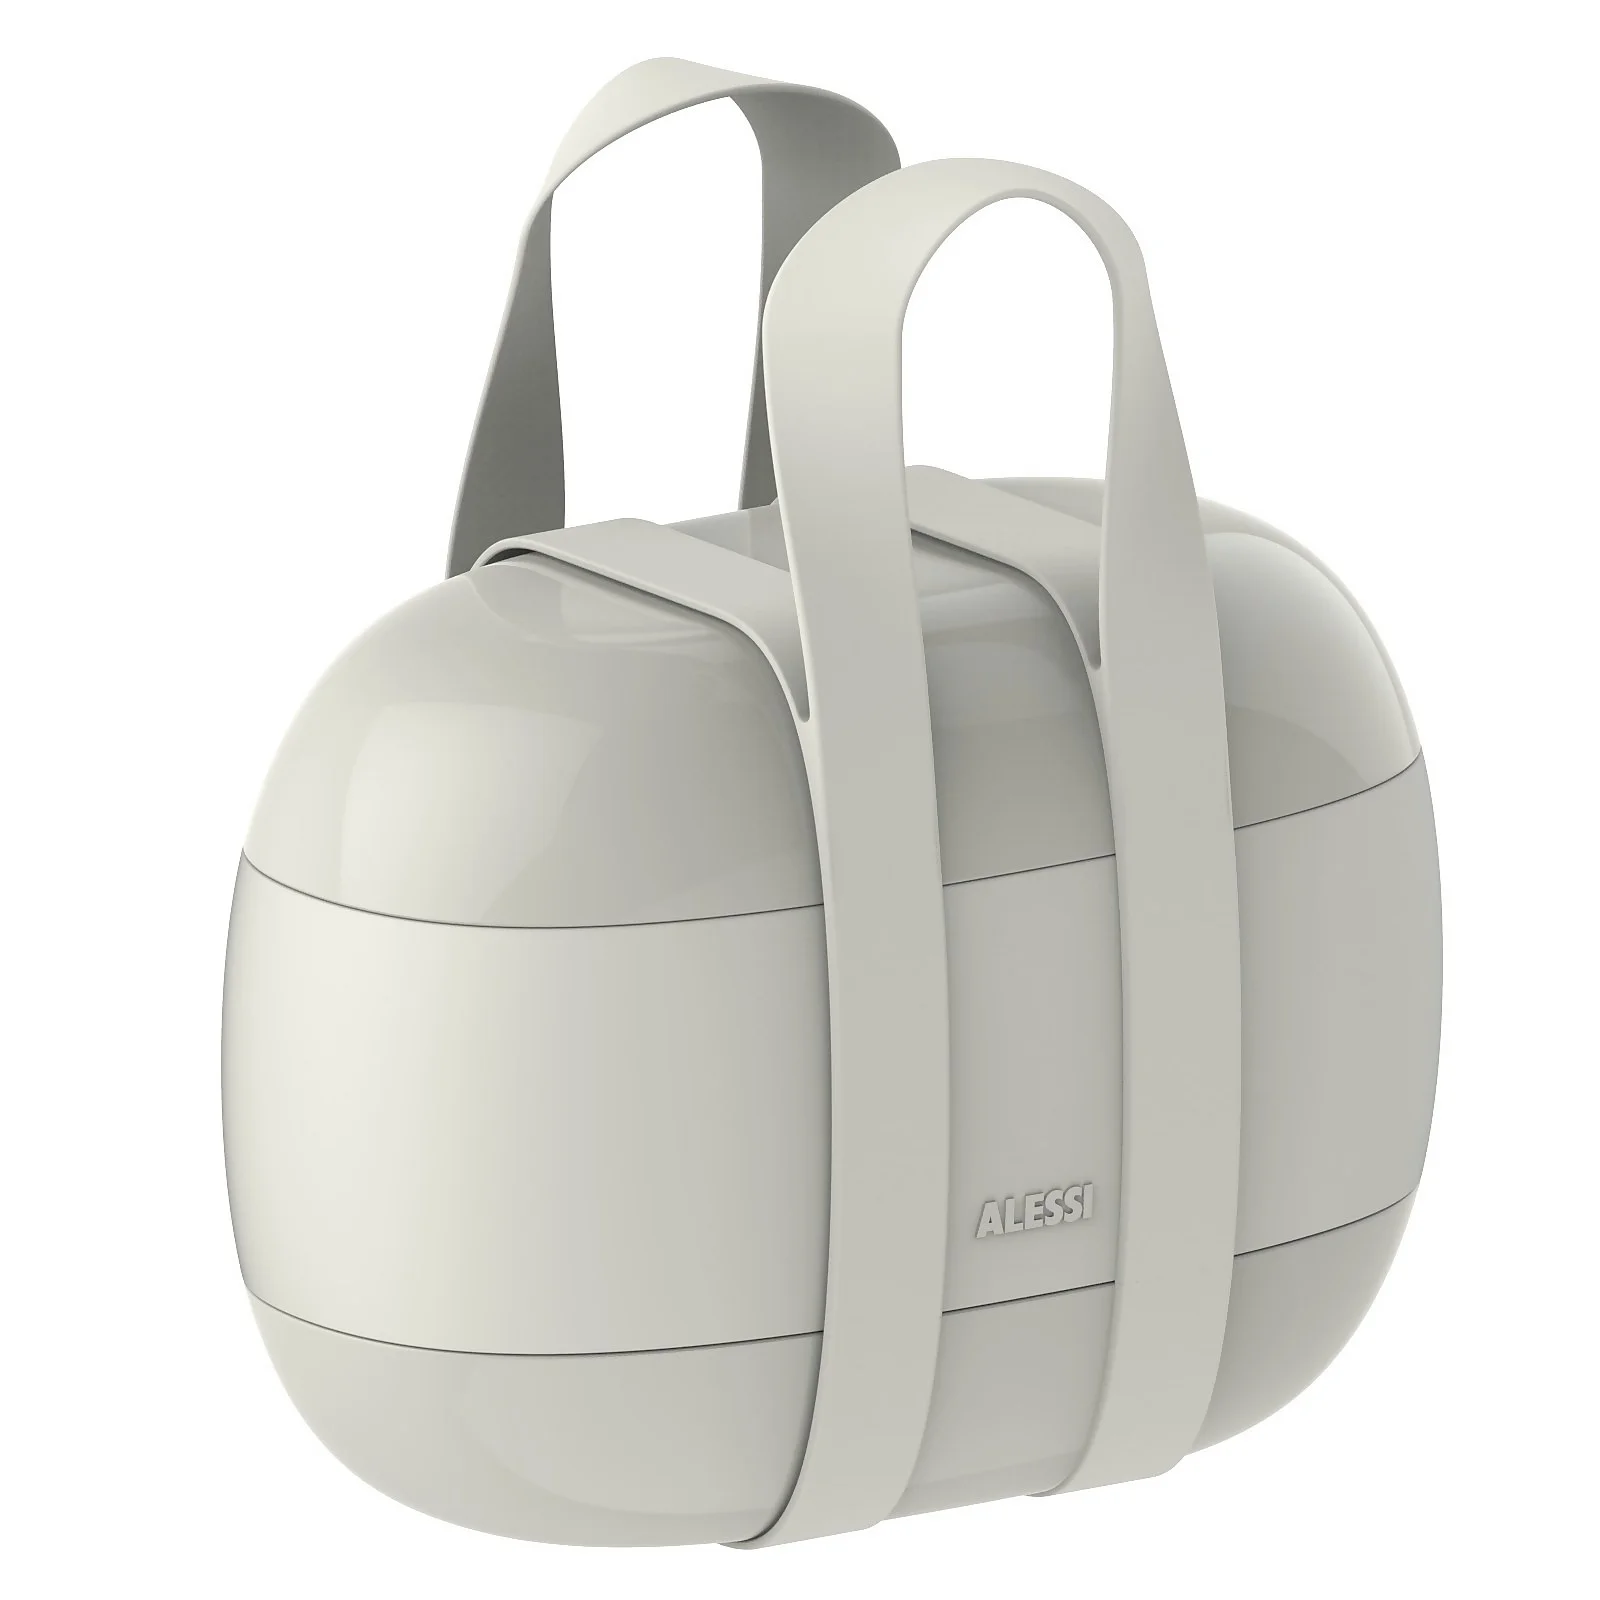 Alessi Lunch Box Food à Porter - Grey Image 1